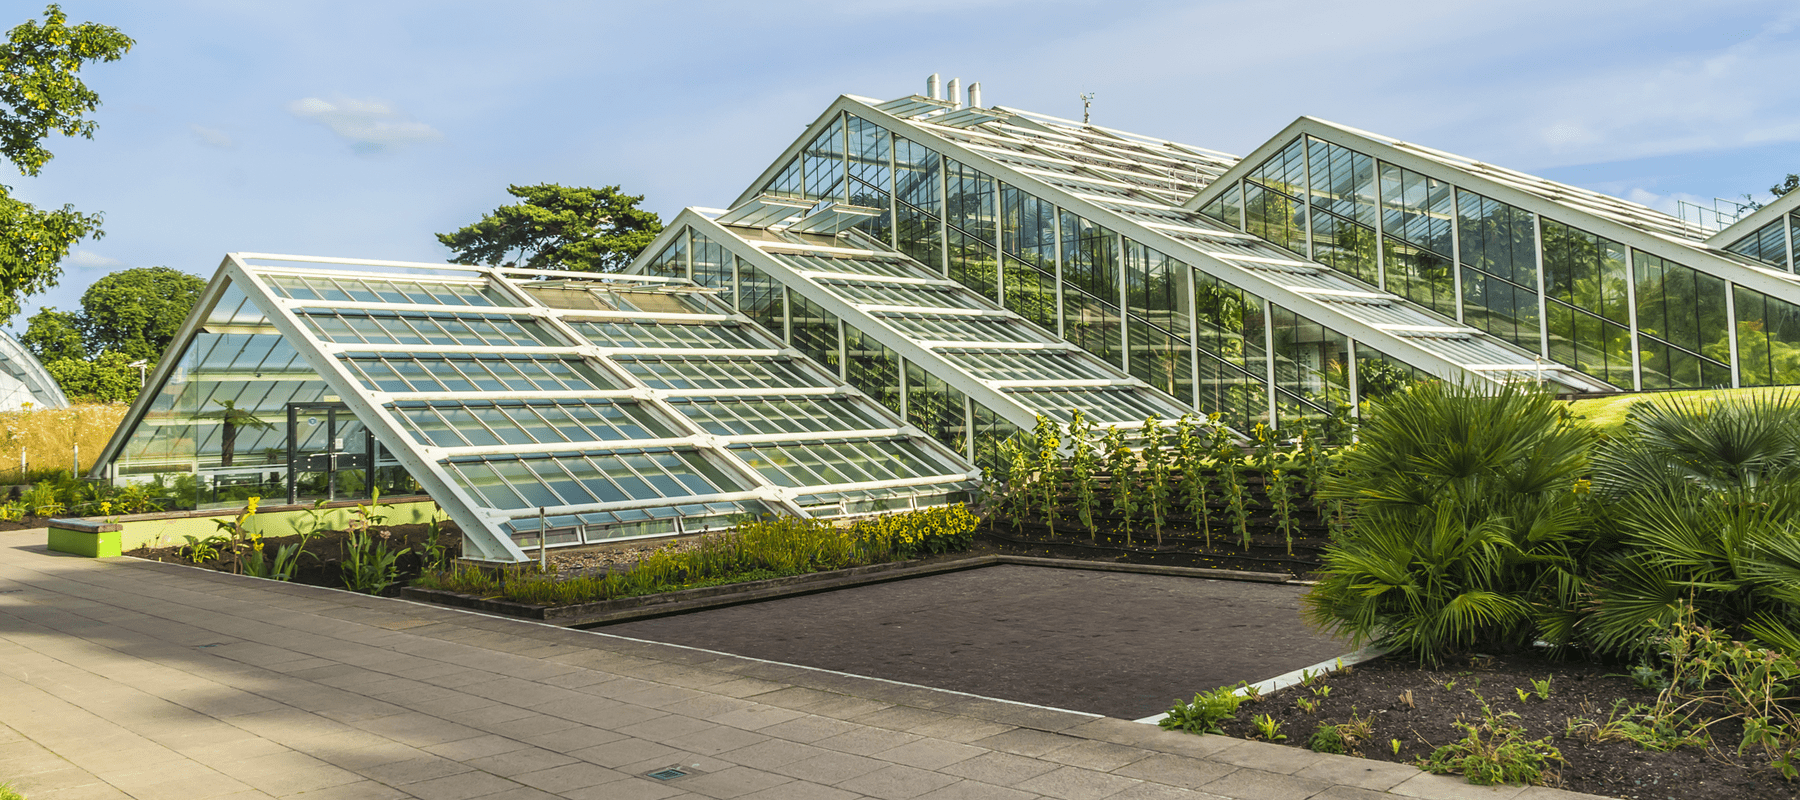 The Princess of Wales Conservatory at Kew Gardens 